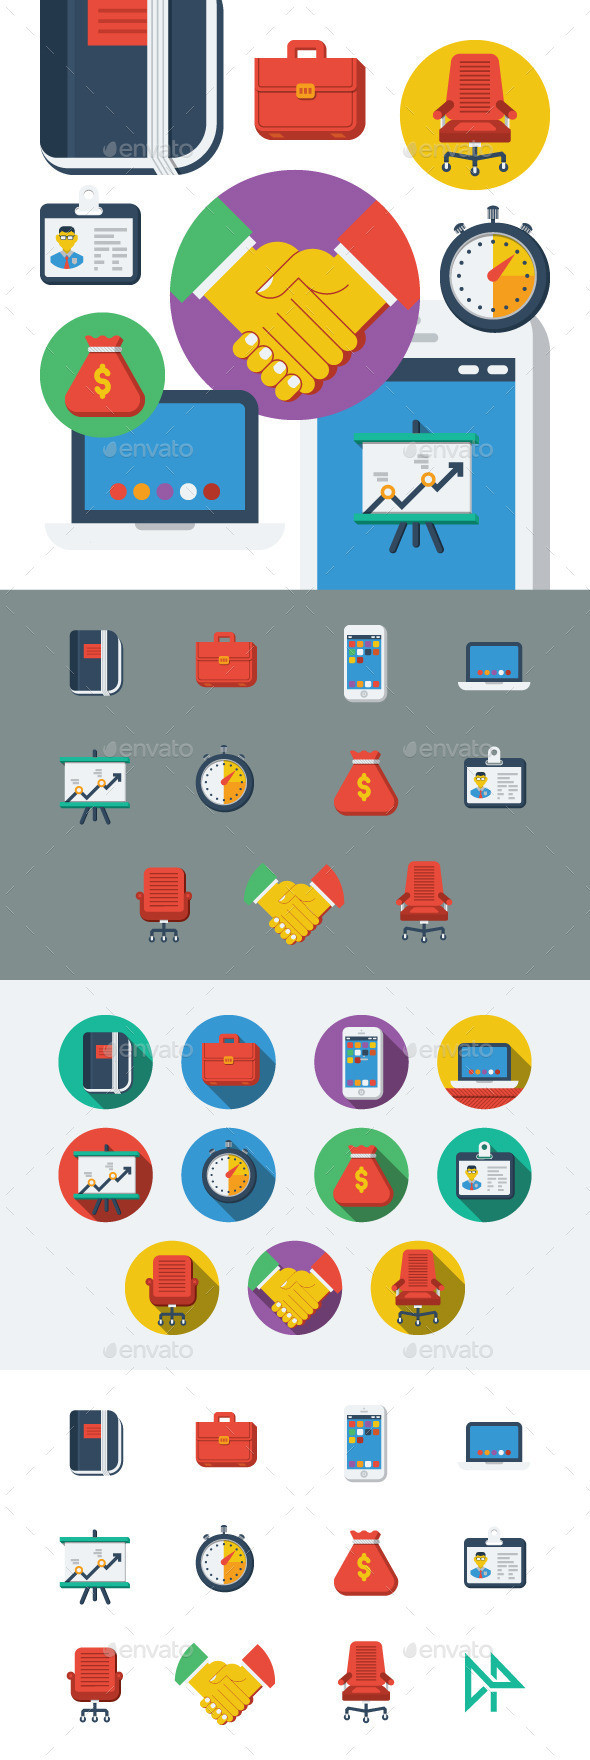 Flat icons preview  envato  590x1760px